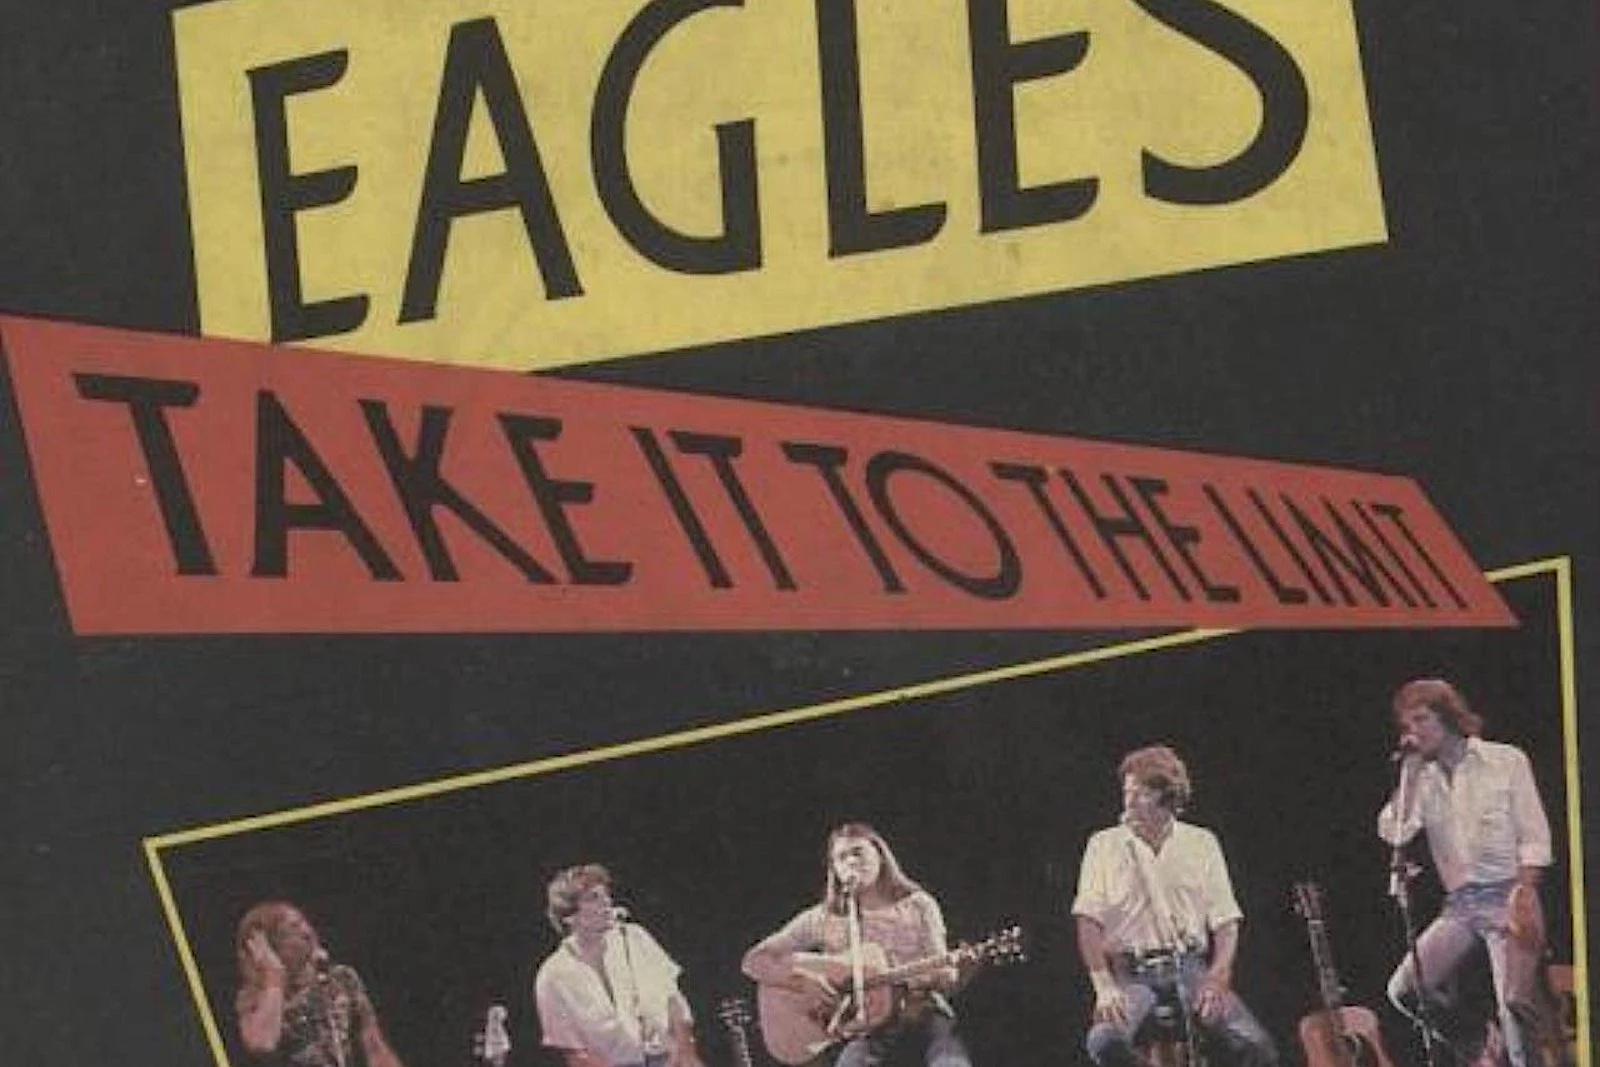 How Randy Meisner's 'Take It to the Limit' Fractured the Eagles